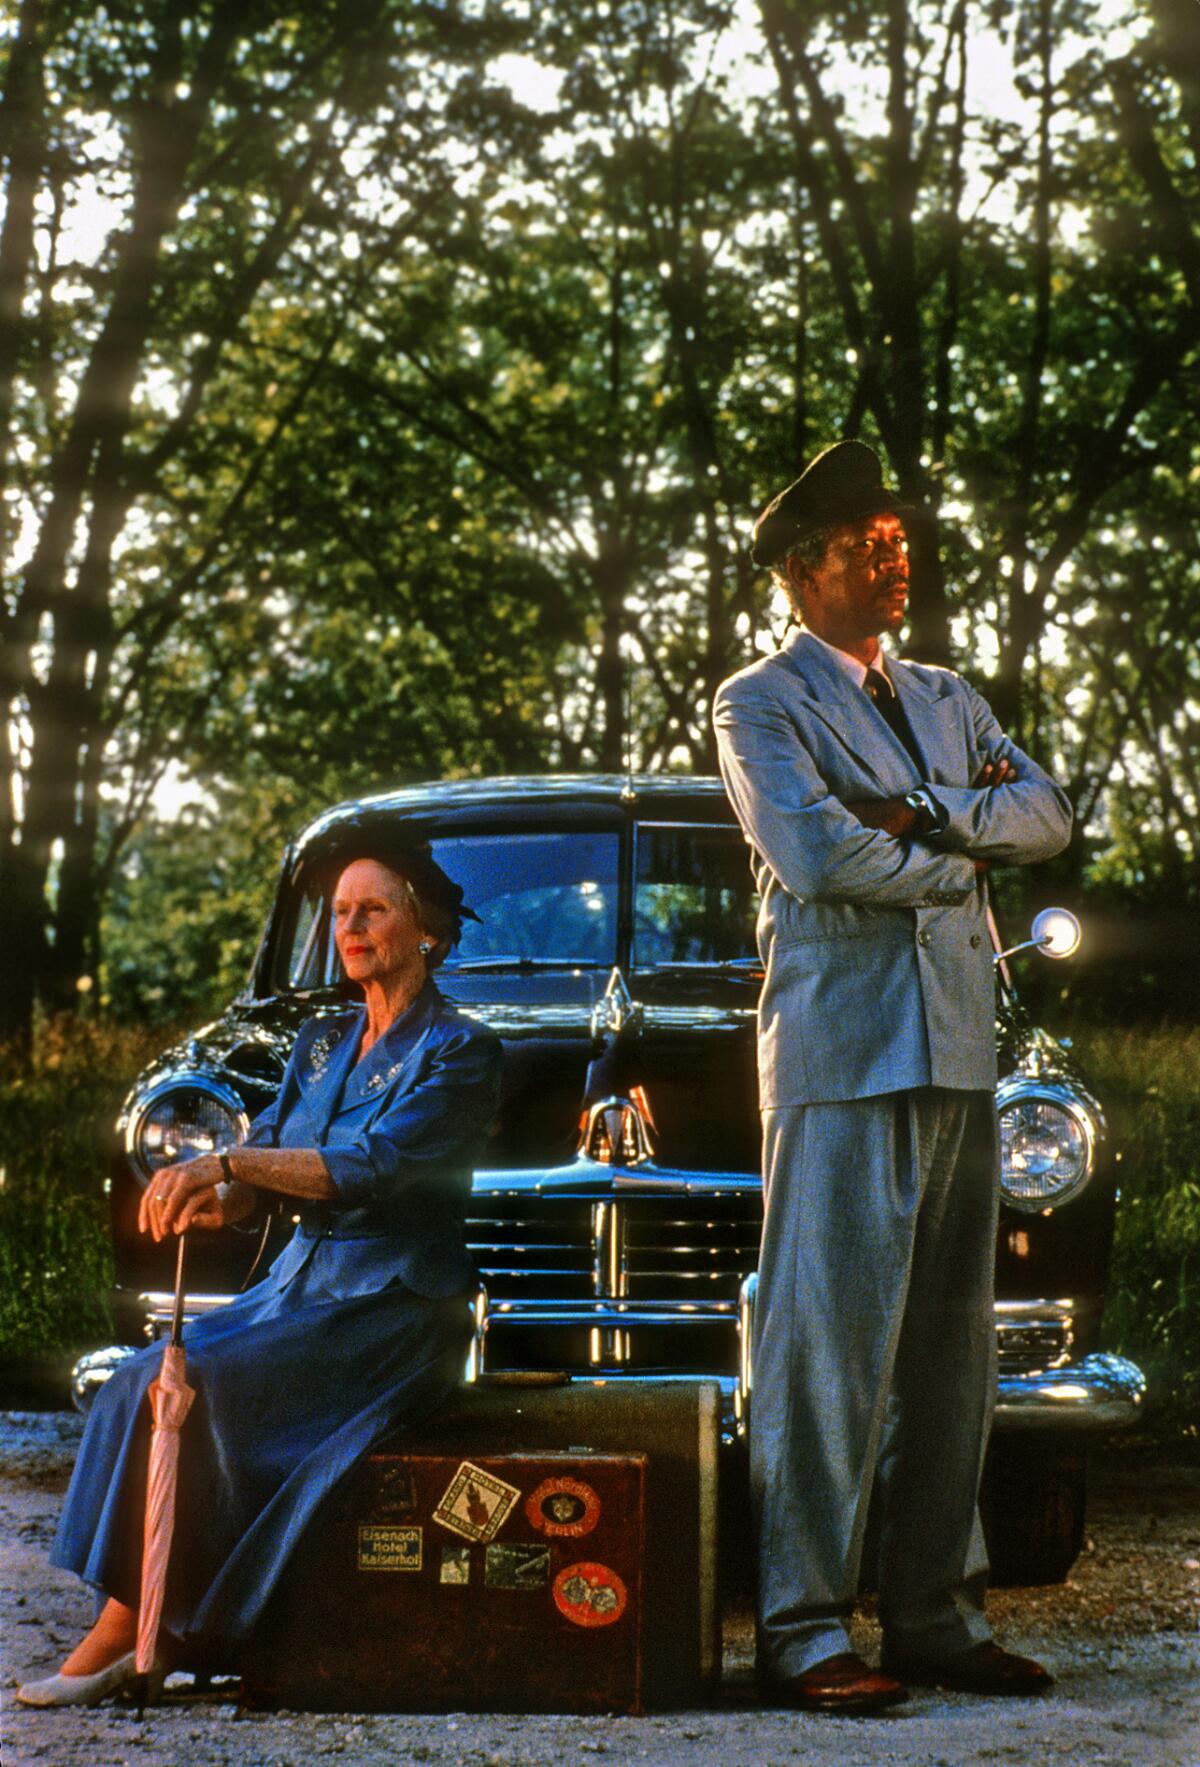 Jessica Tandy and Morgan Freeman in the movie "Driving Miss Daisy."